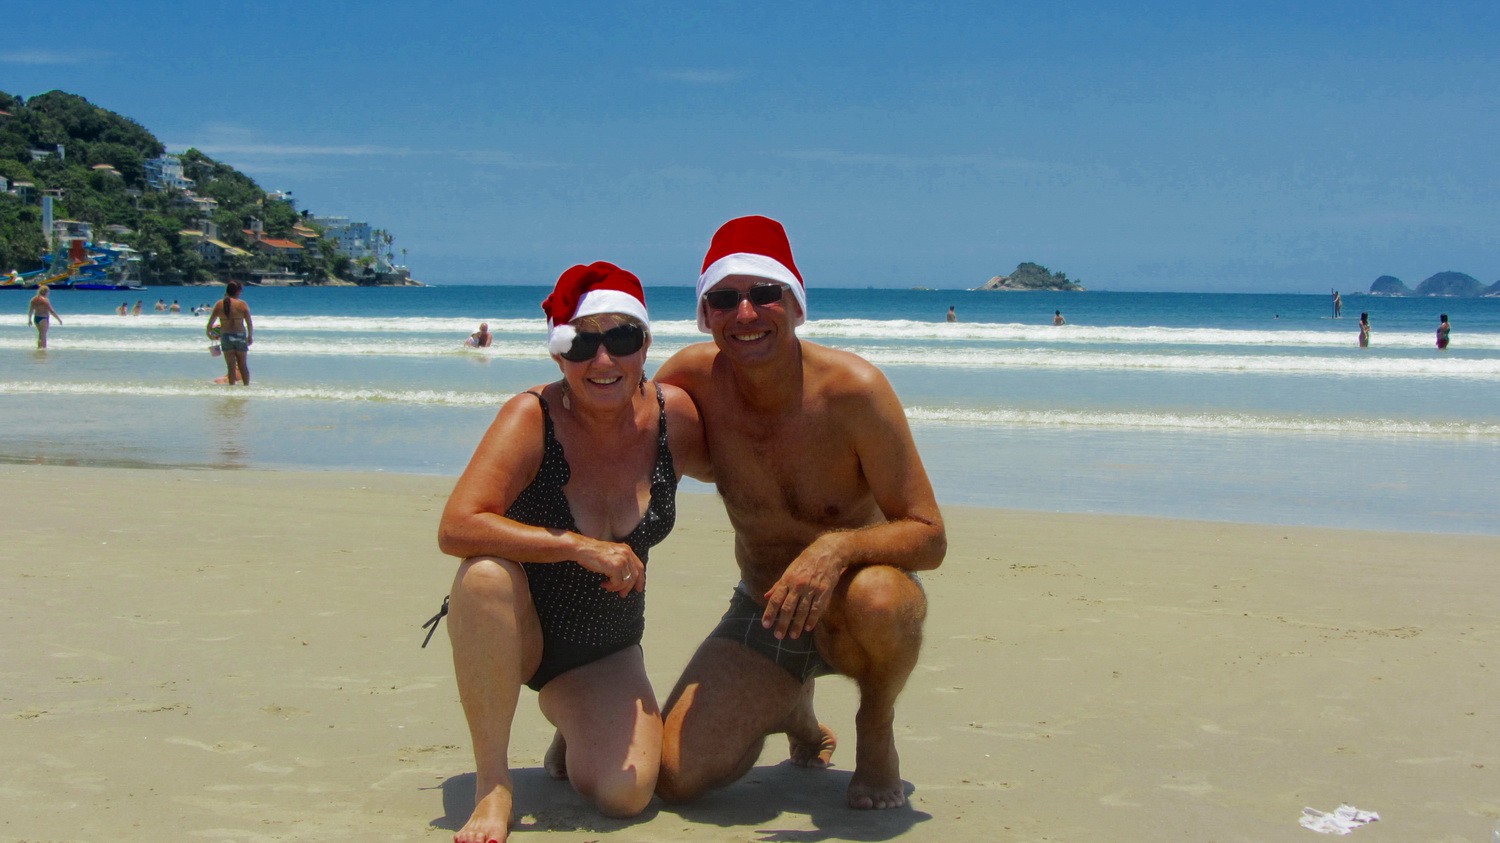 Christmas is coming, also in hot Brazil!